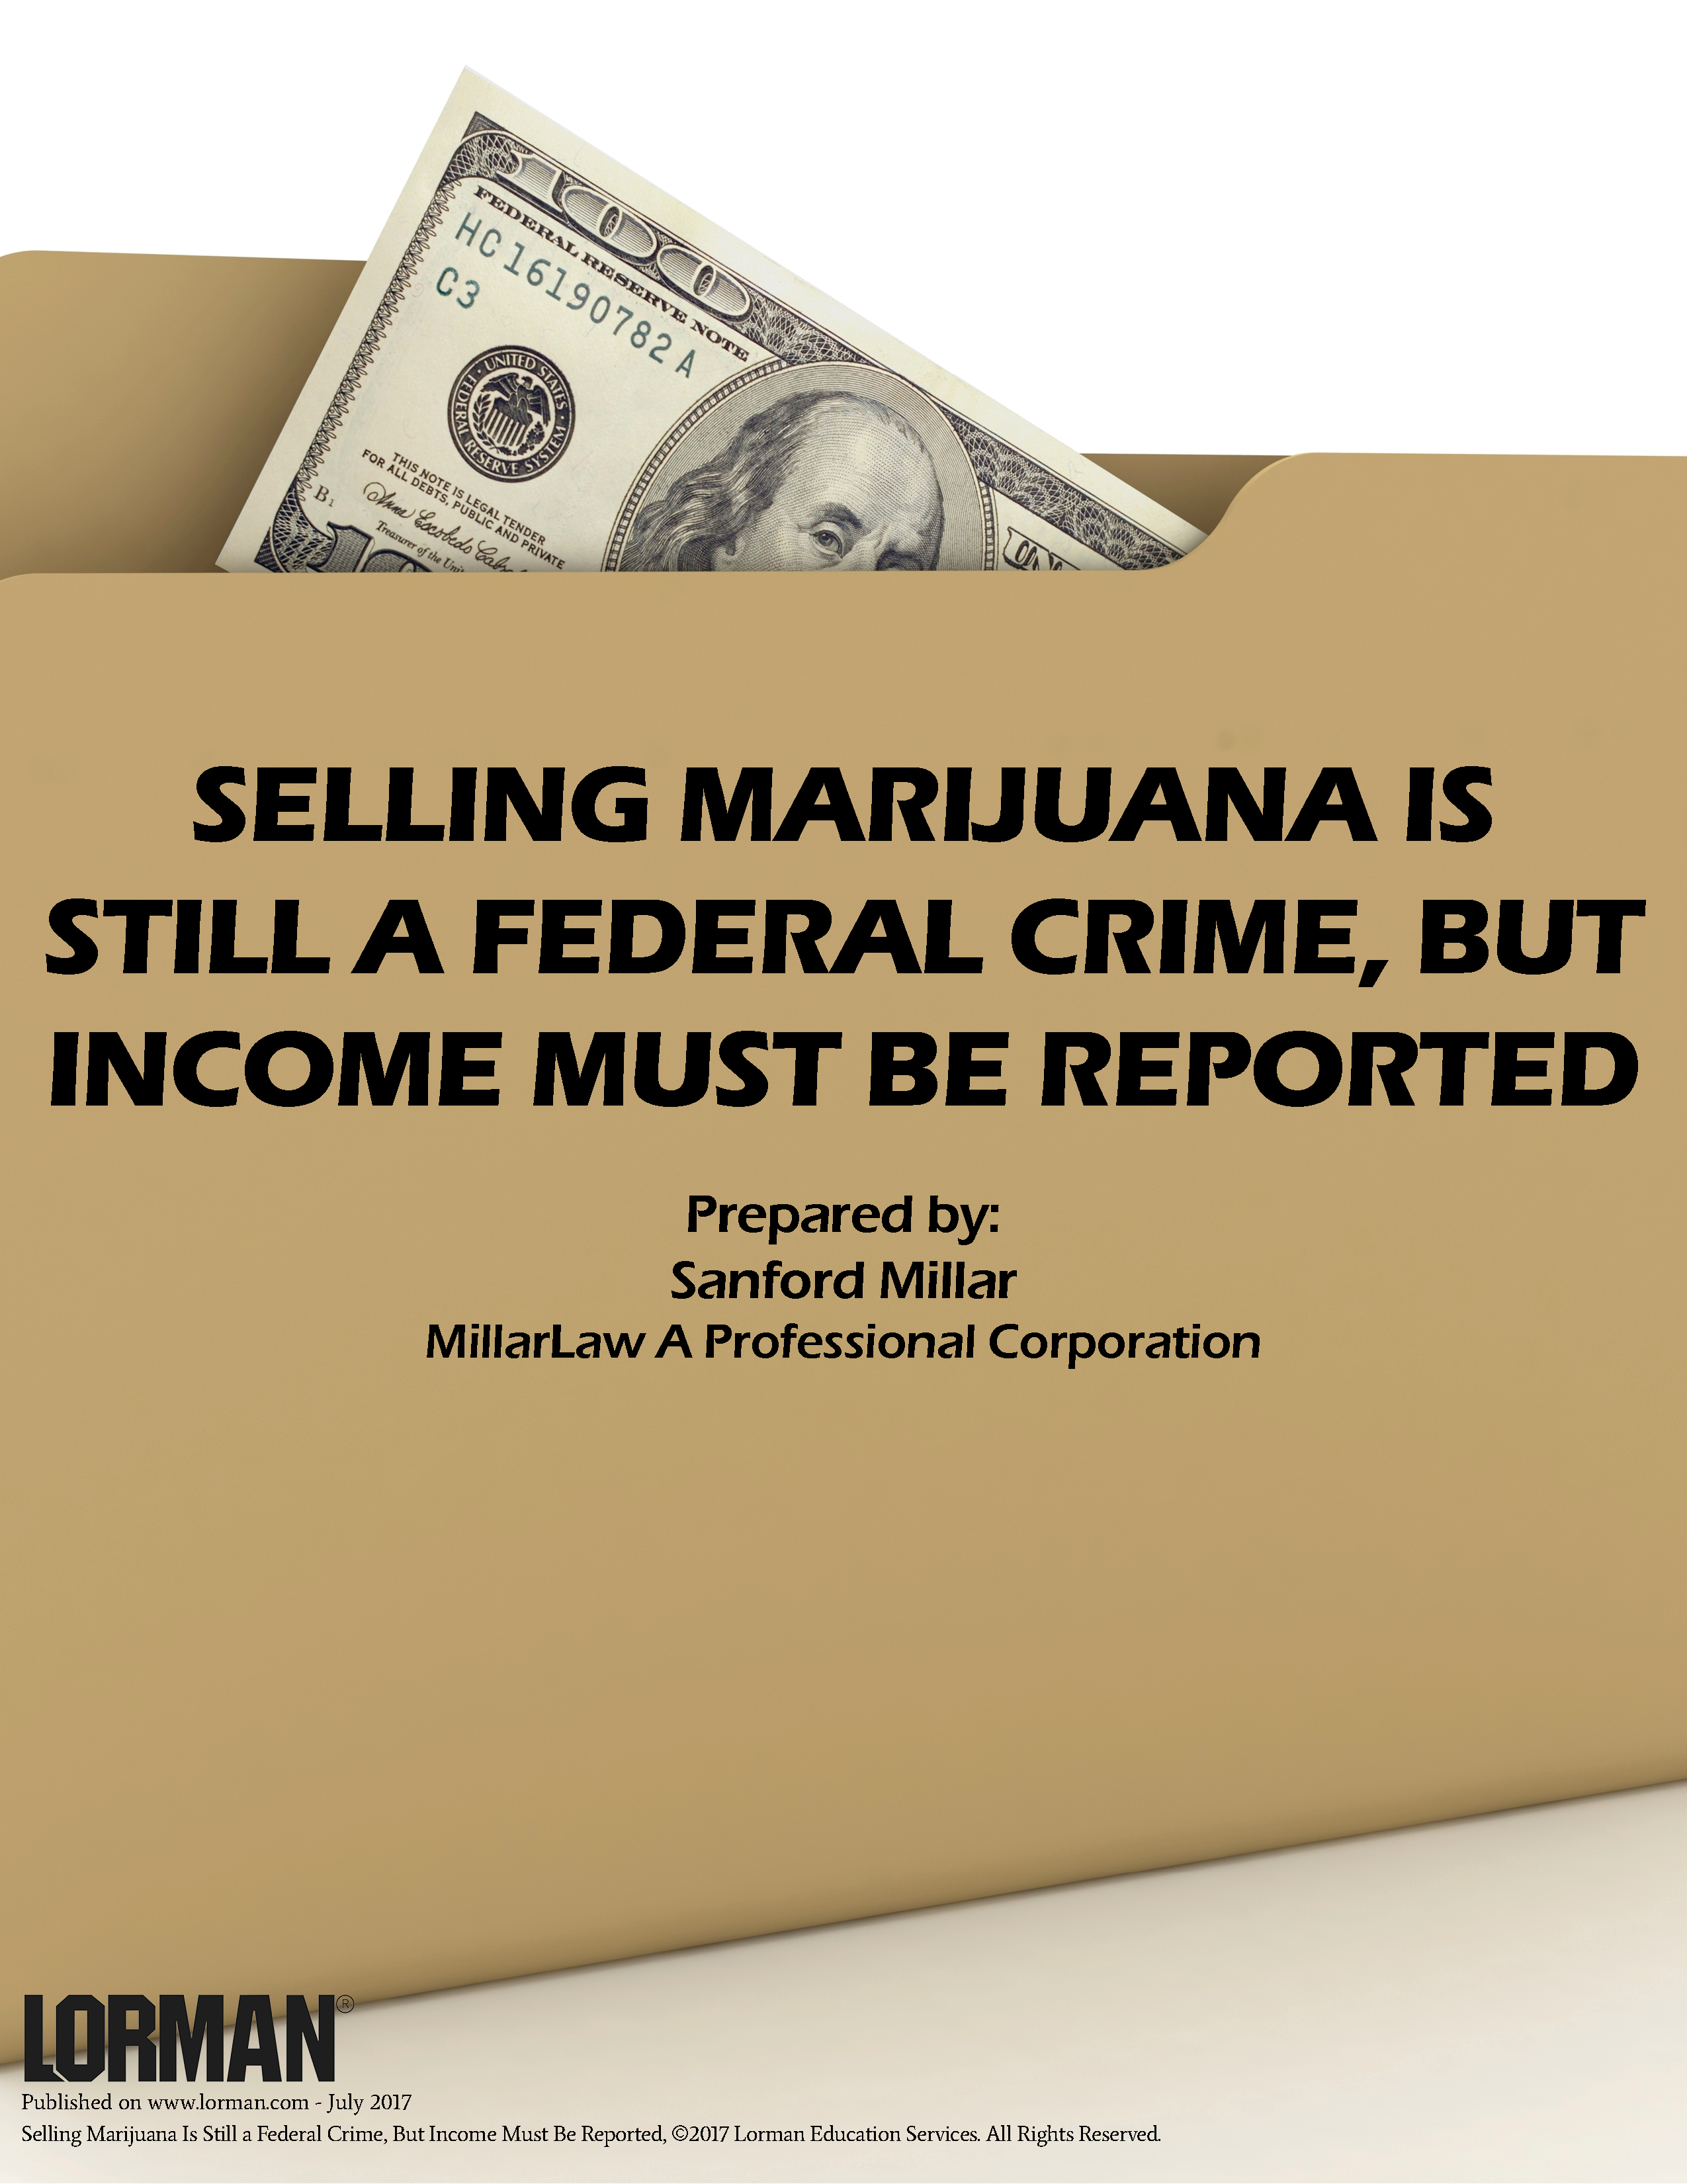 Selling Marijuana Is Still a Federal Crime, but Income Must Be Reported